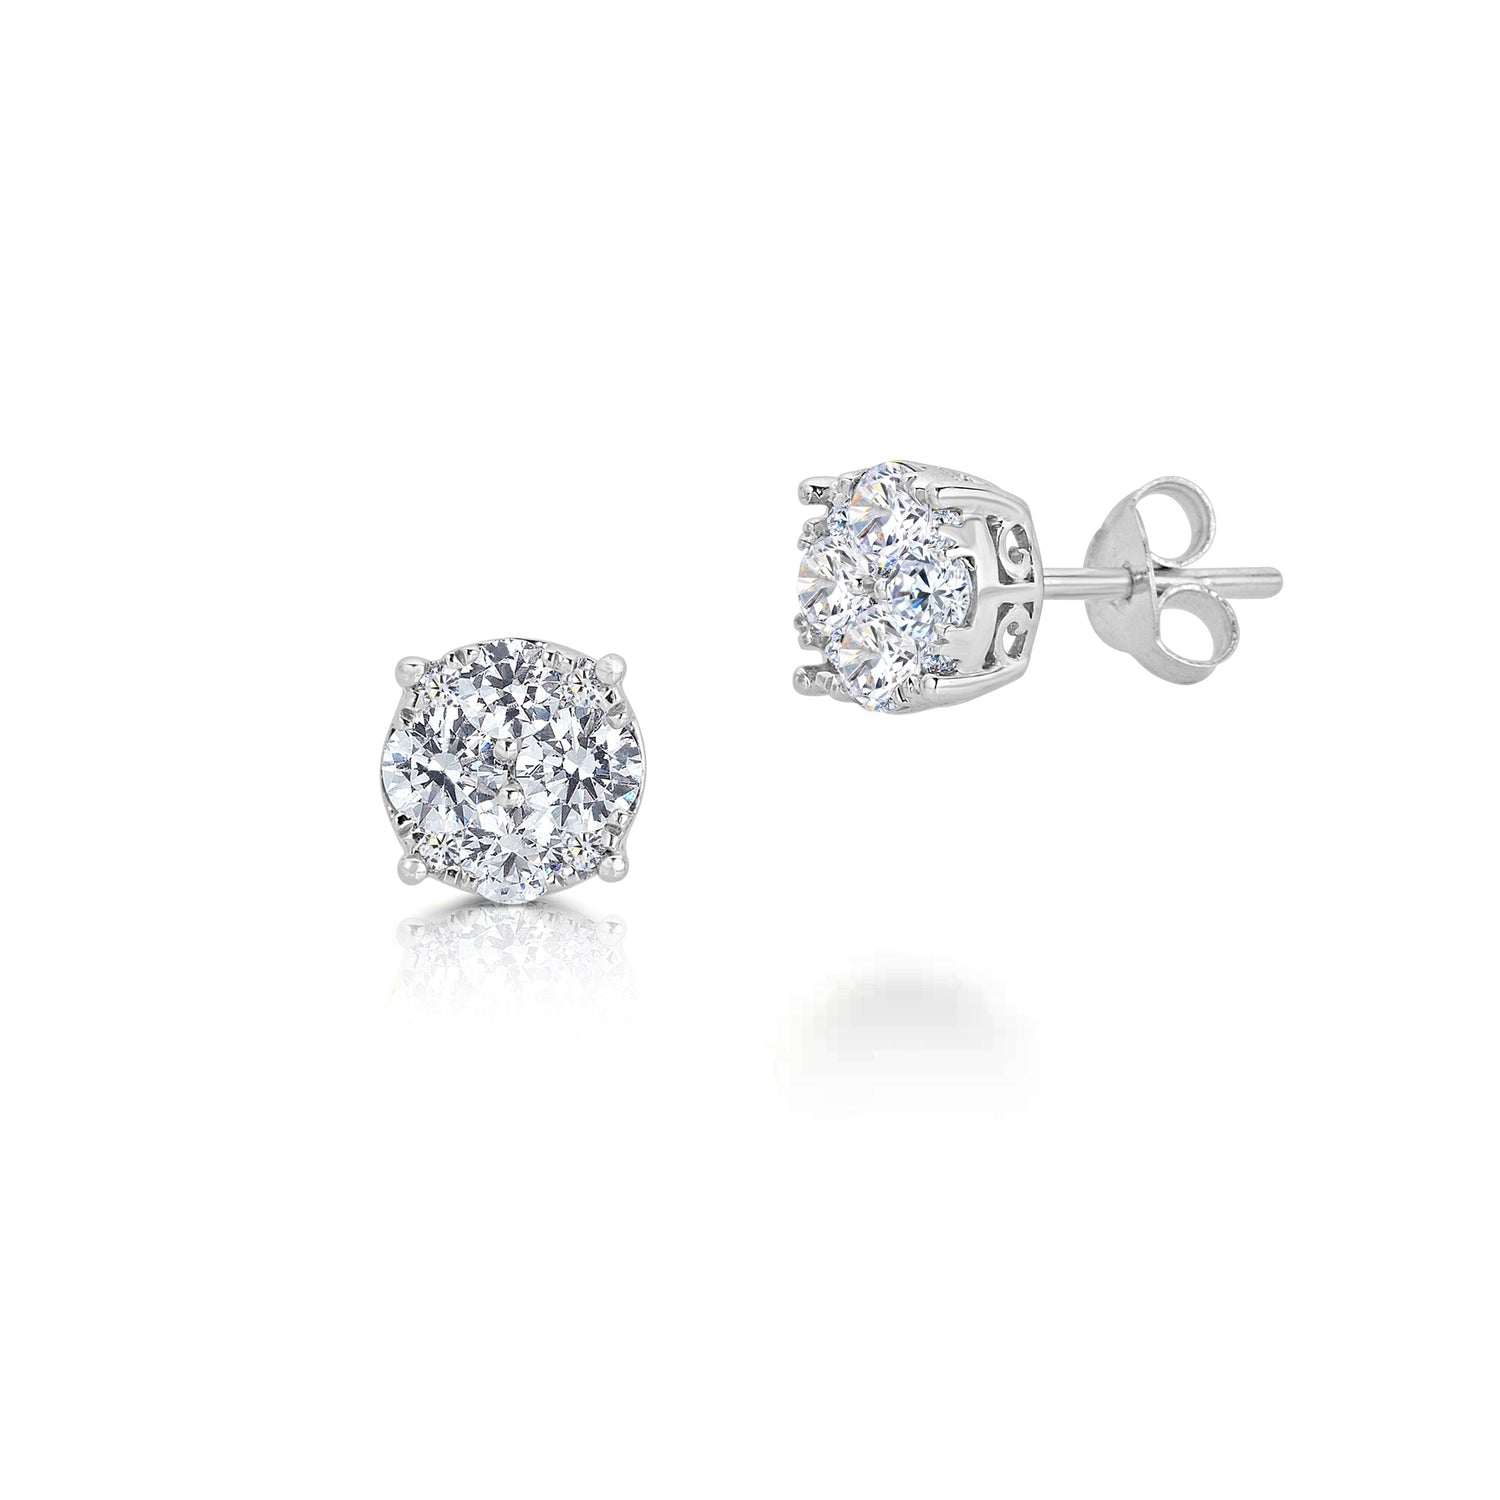 1/4 - 1 Cttw I2 Clarity Diamond Round Grand Cluster Stud Earrings in 14K Gold